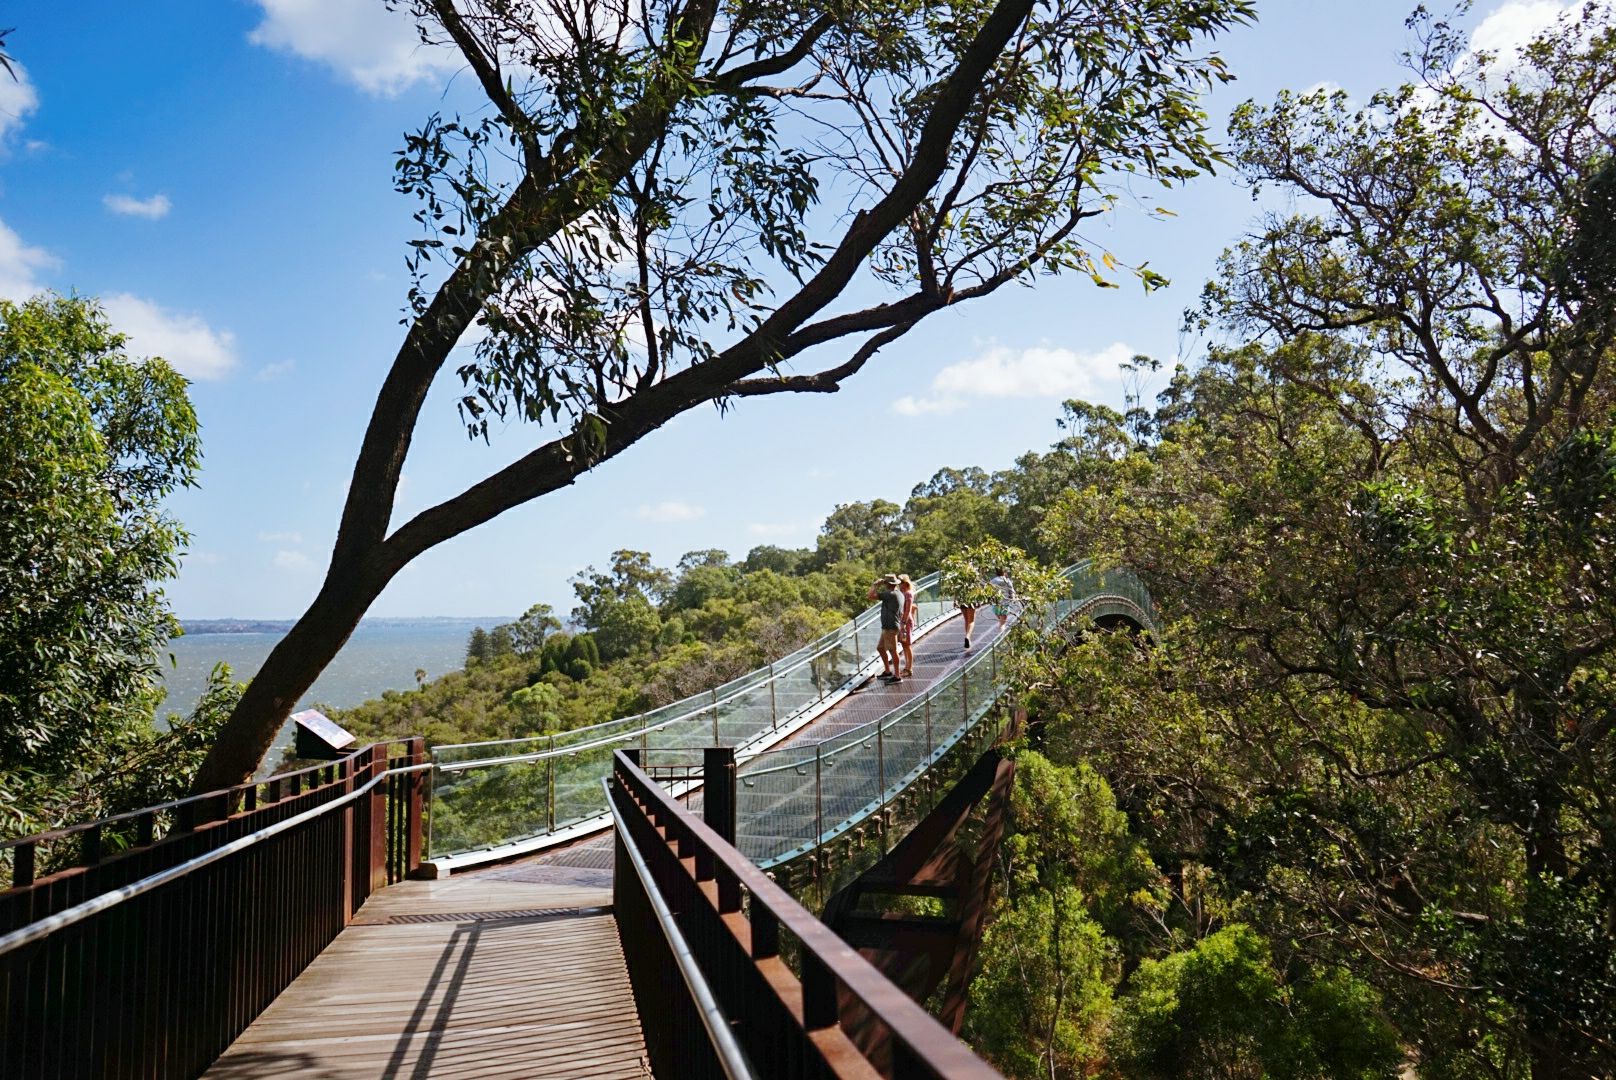 Lotterywest Federation Walkway attraction reviews - Lotterywest Federation  Walkway tickets - Lotterywest Federation Walkway discounts - Lotterywest  Federation Walkway transportation, address, opening hours - attractions,  hotels, and food near ...